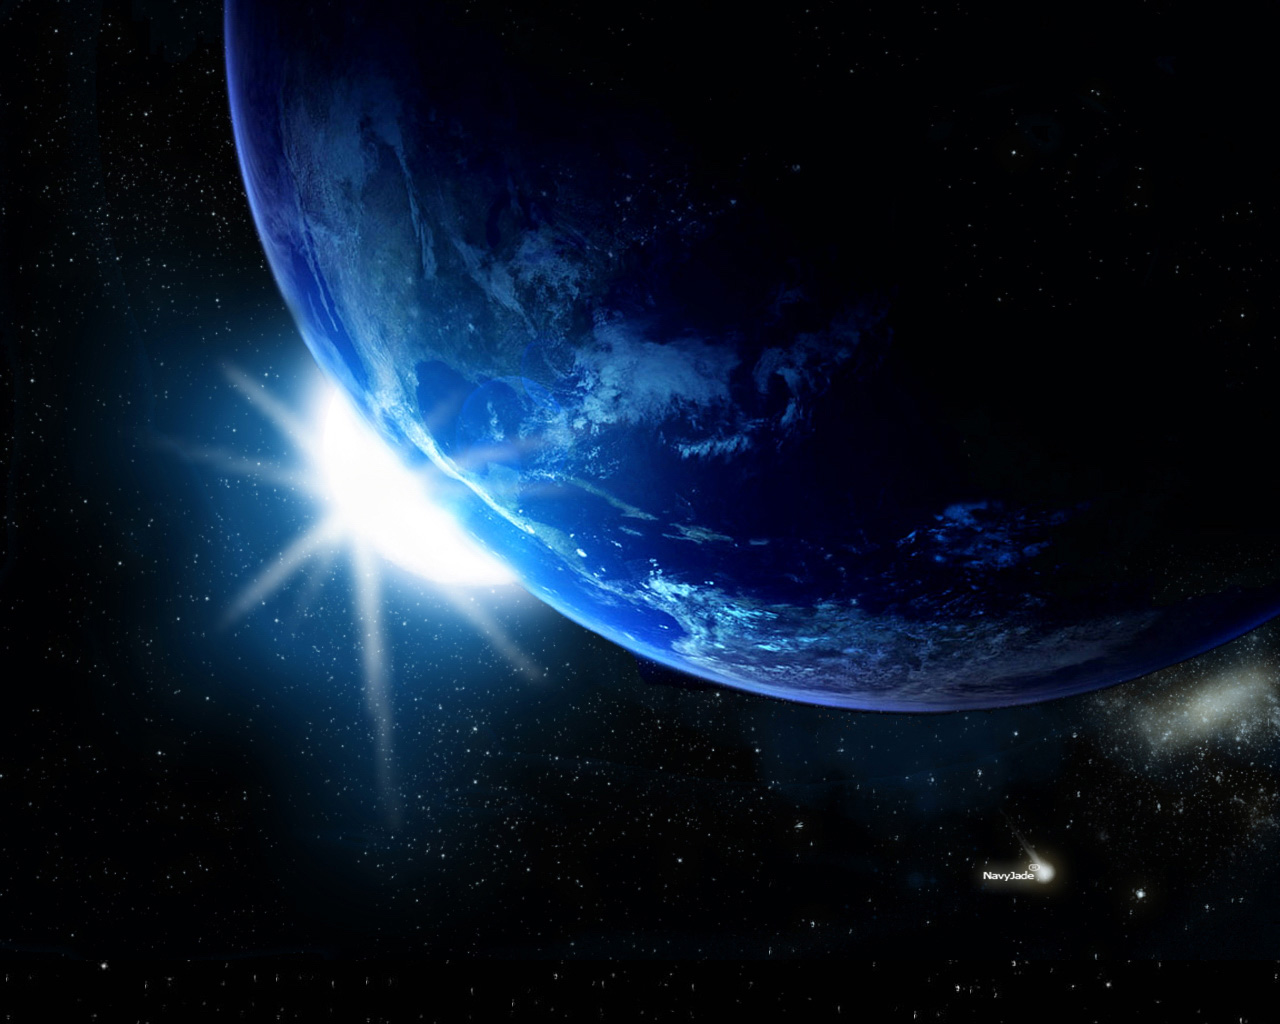 3D Wallpaper Of Space 2014 Free 15 HD Wallpapers